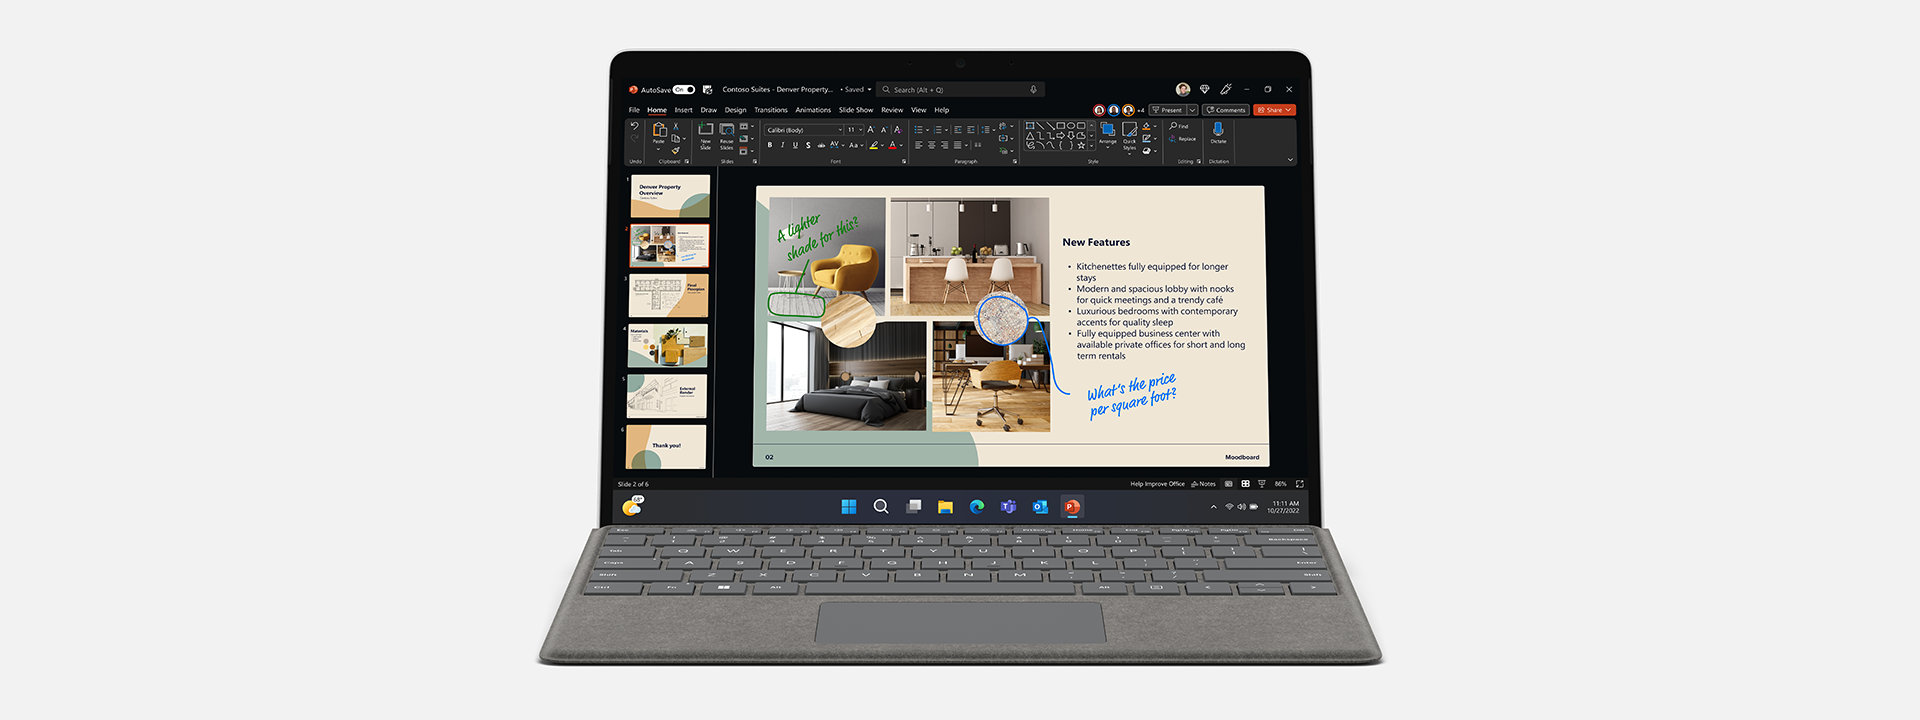 Surface Pro 9 for Business with Microsoft PowerPoint on the screen.